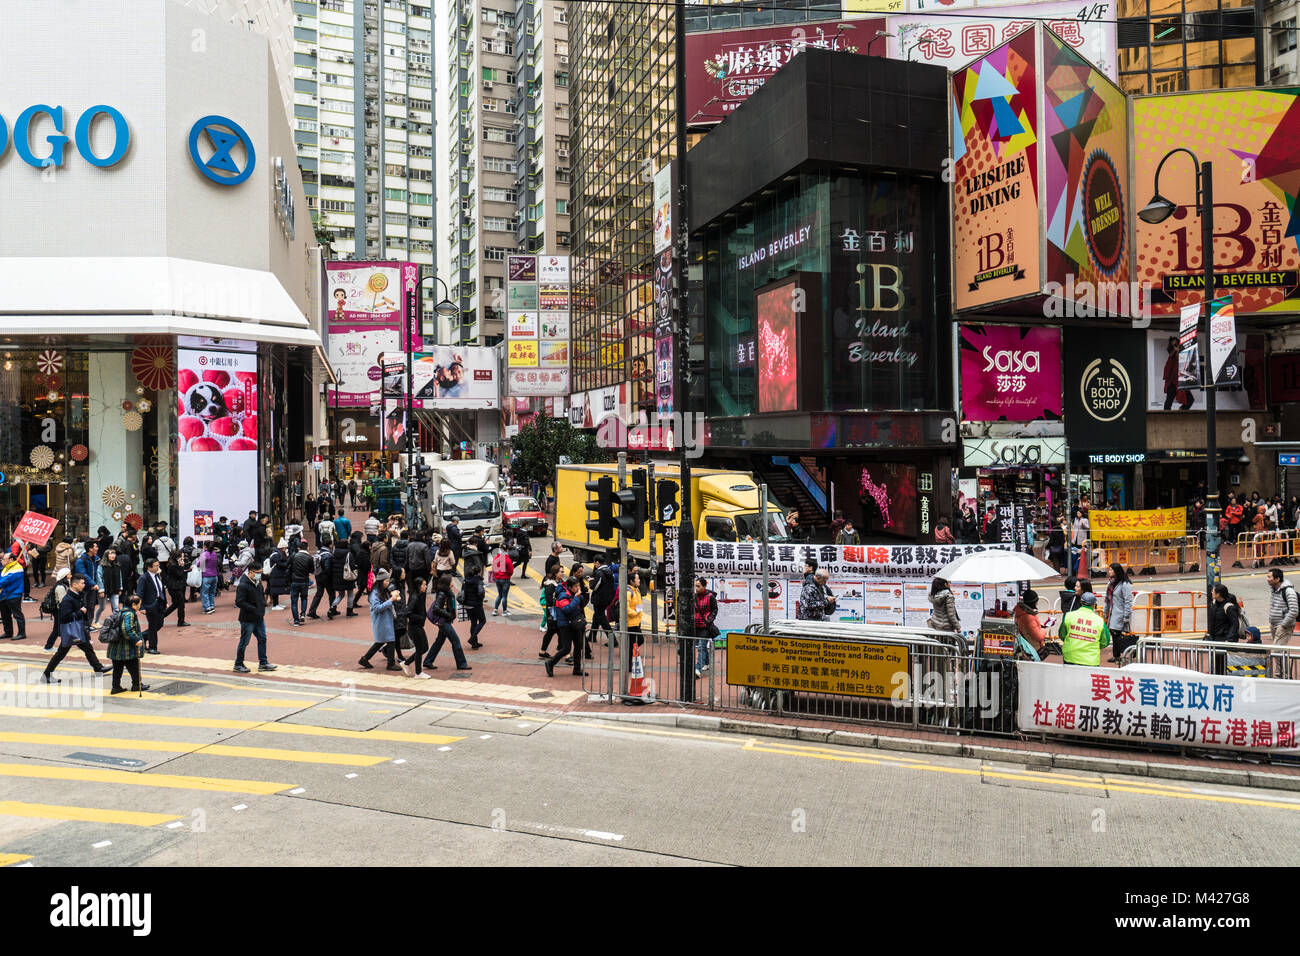 Hong Kong - February 2 2018: People walking in the crowded street of the Causeway Bay shopping district in Hong Kong island Stock Photo